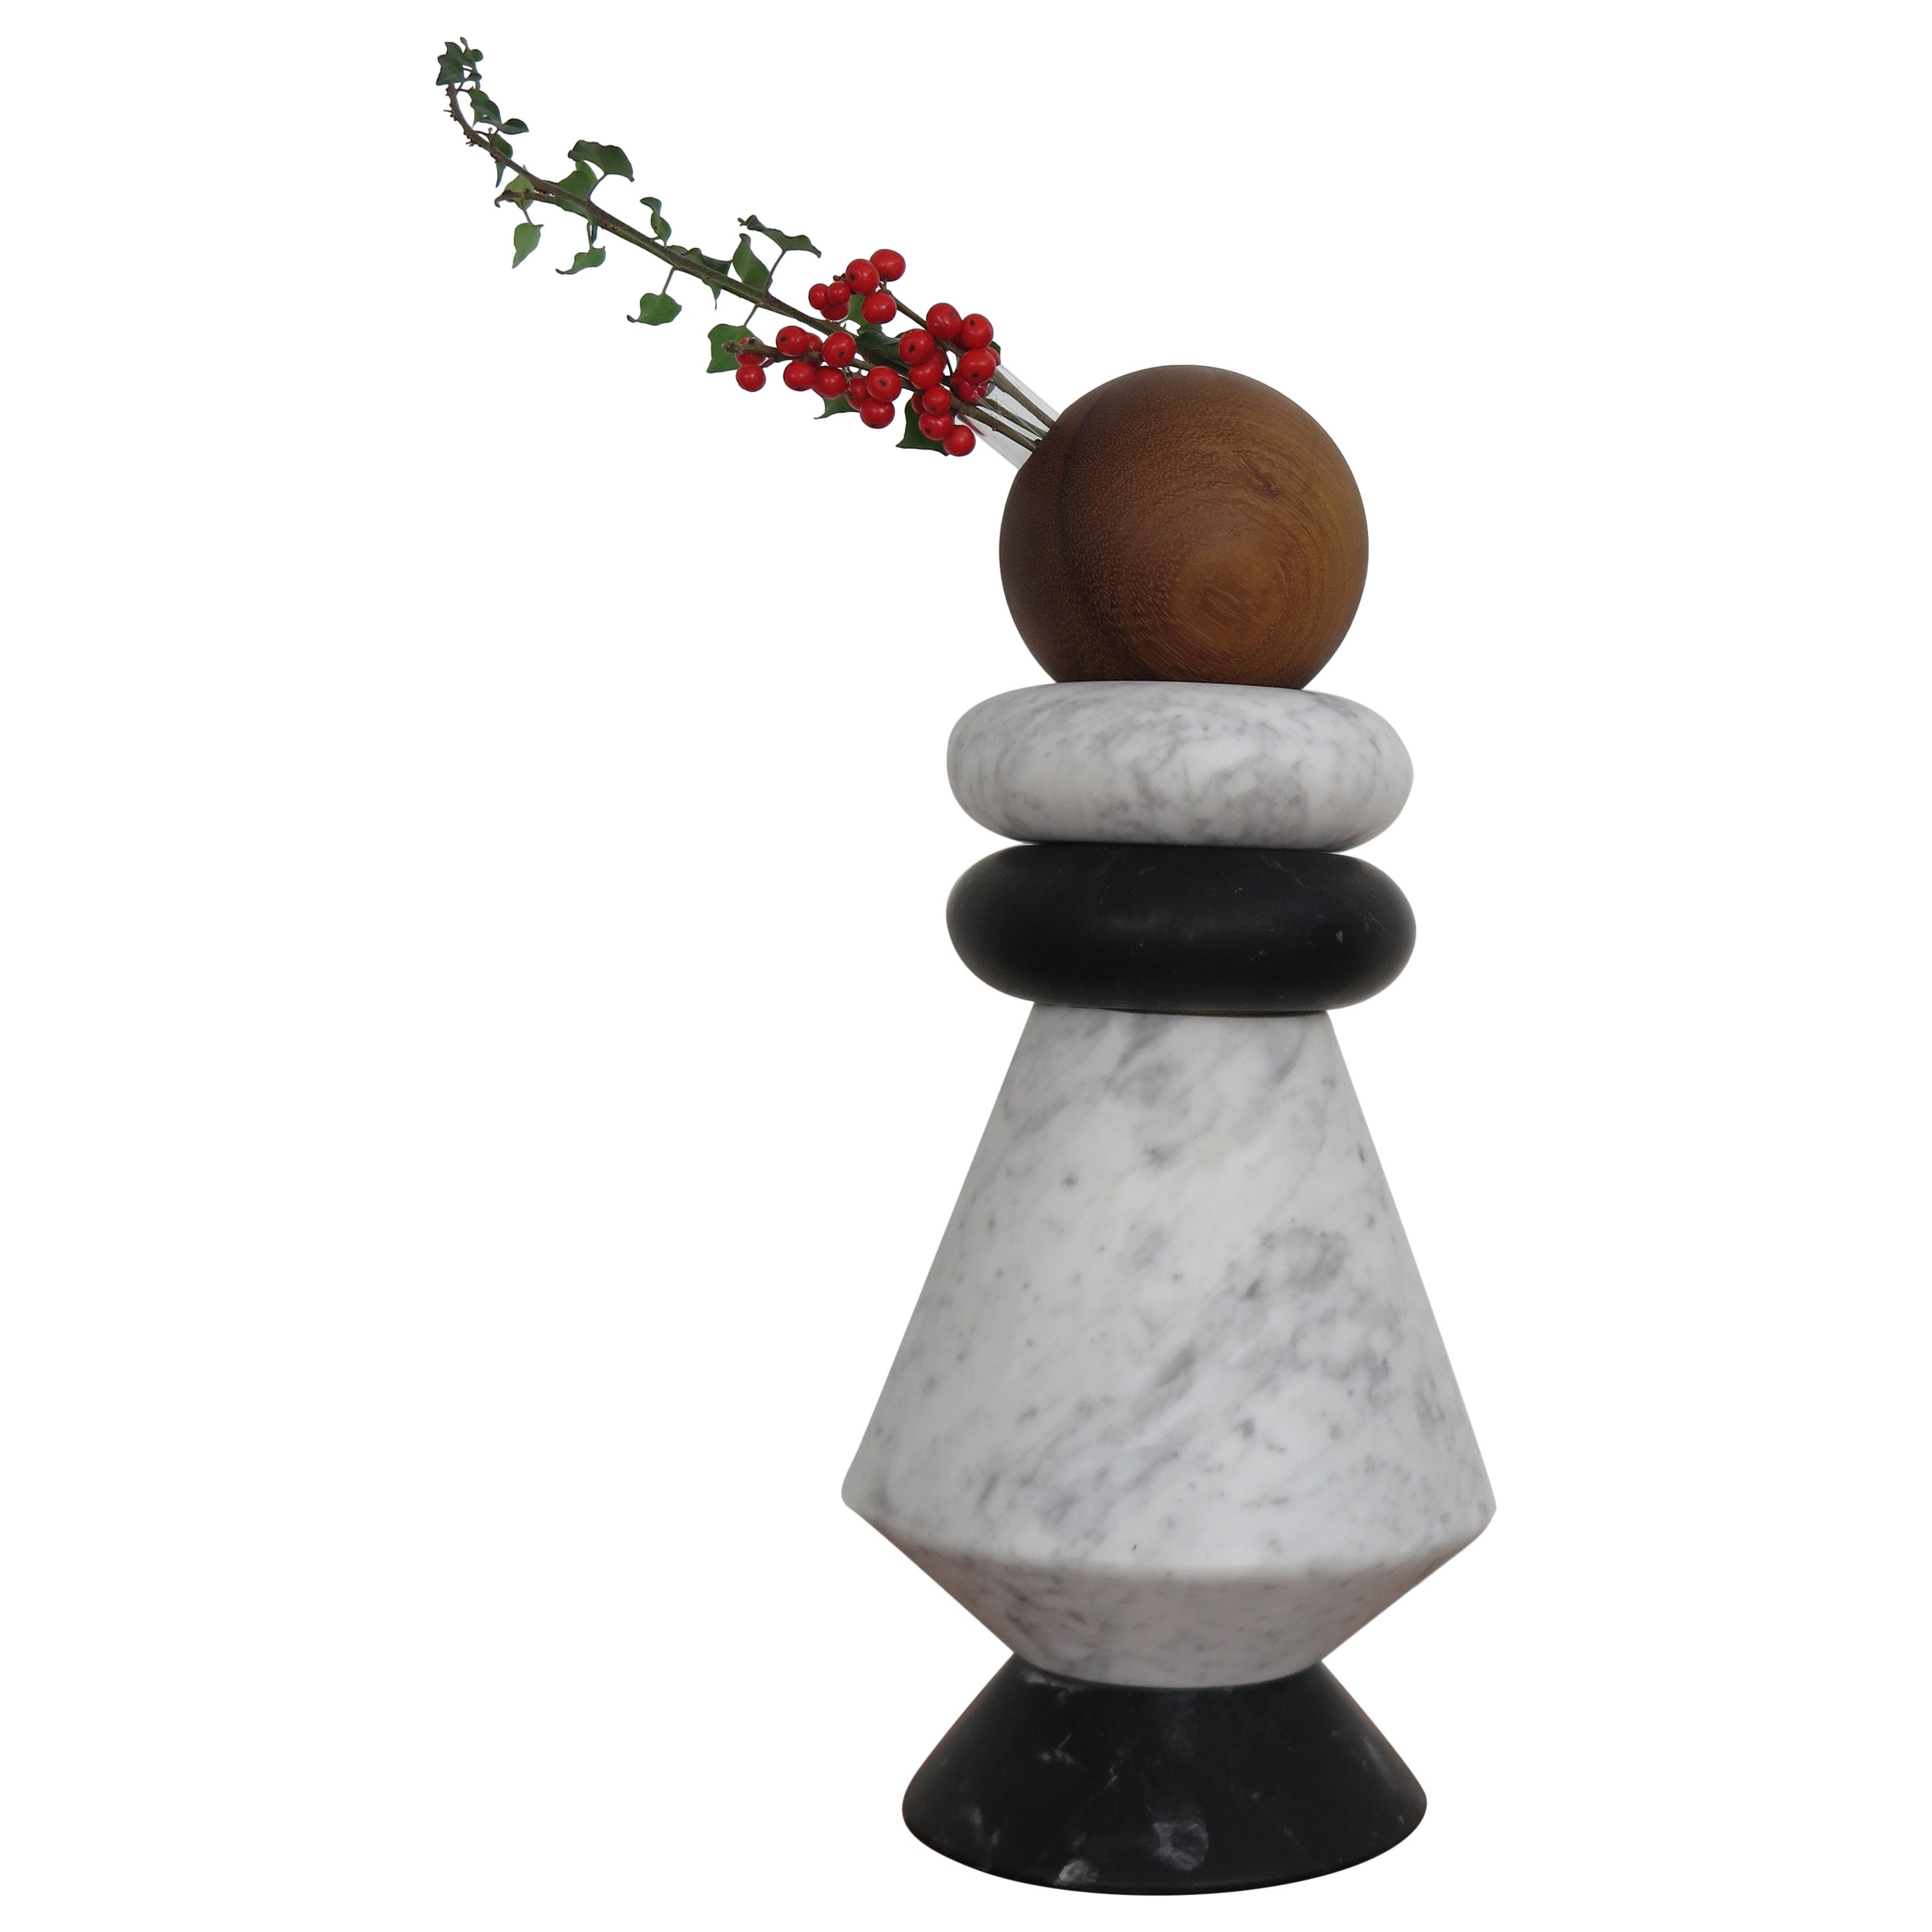 Italian Marble and Wood Contemporary Sculpture, Flower Vase "iTotem" For Sale